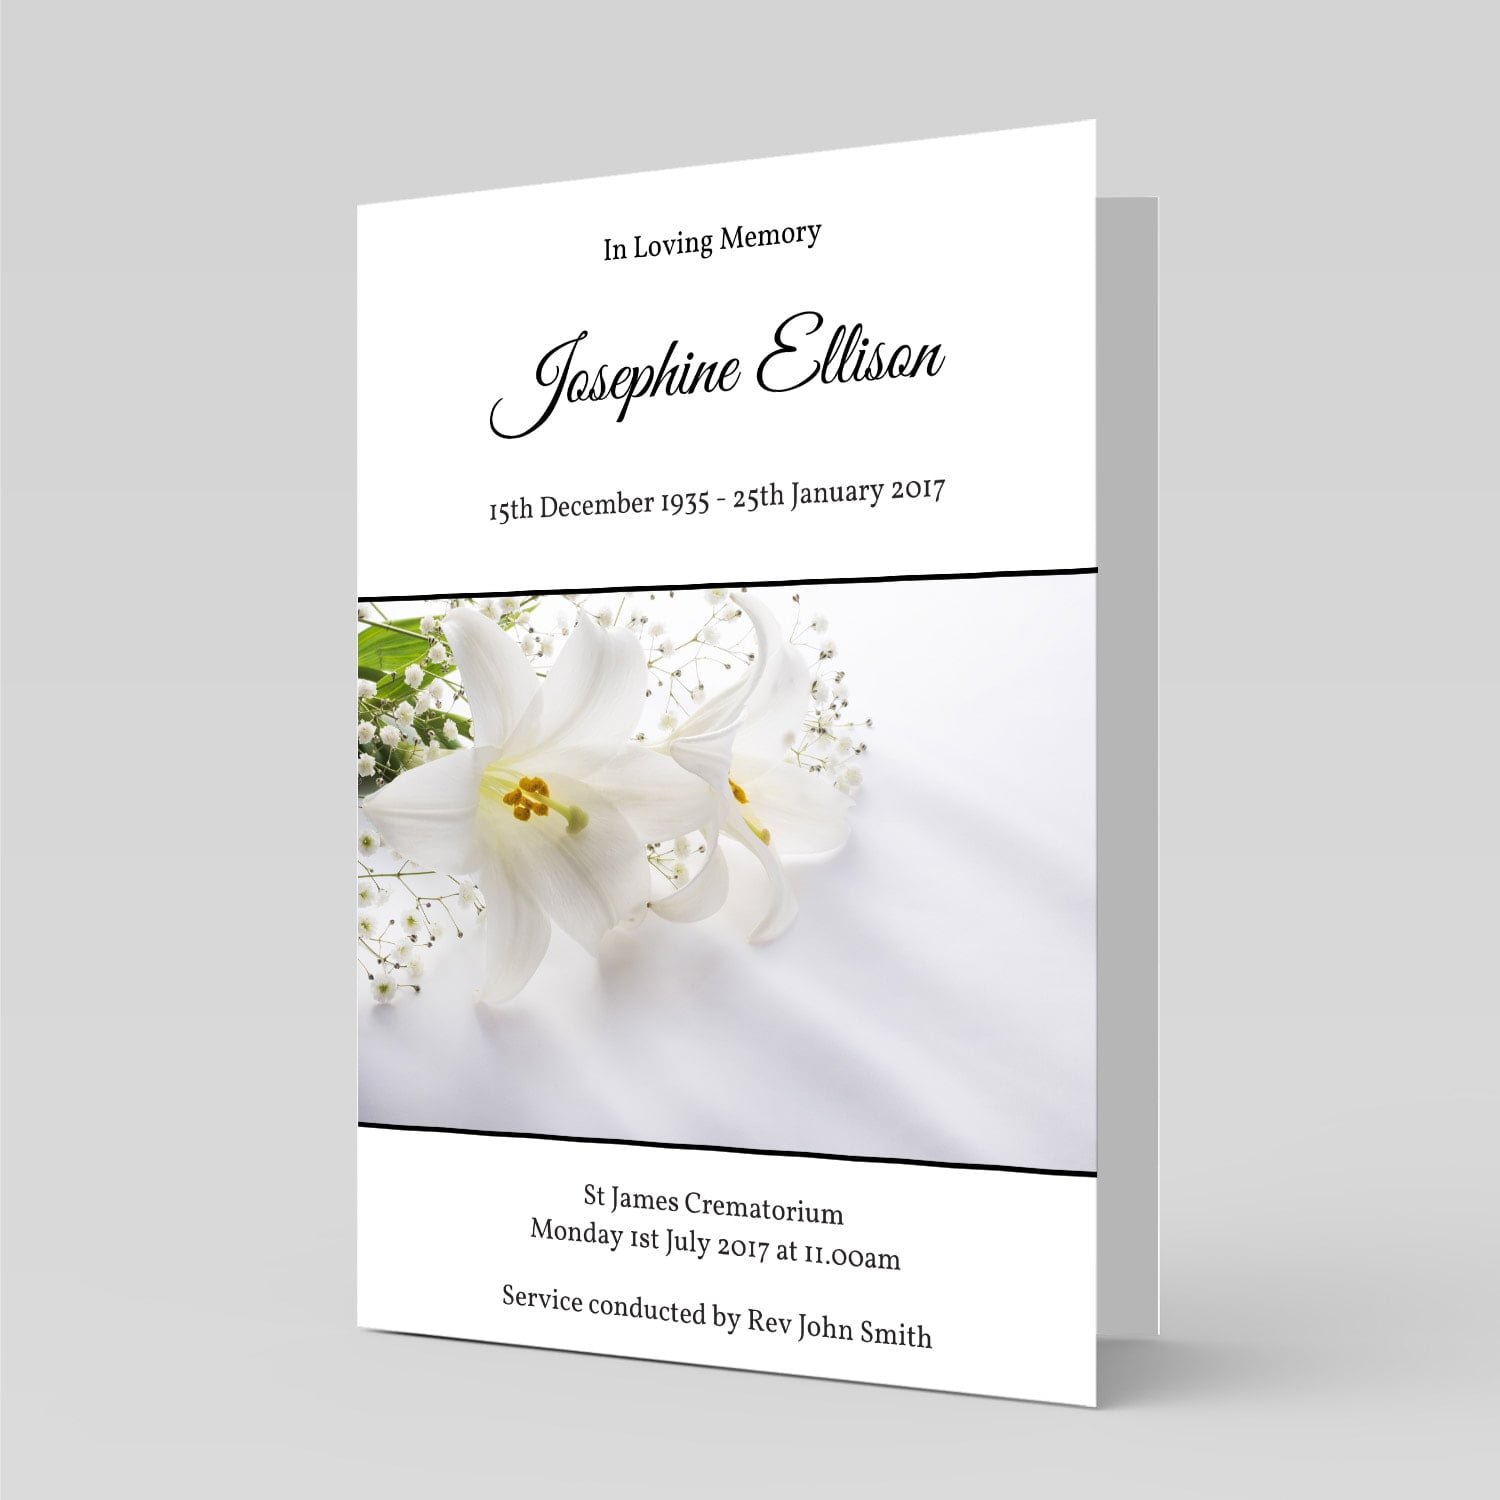 Funeral Order of Service Frontcover